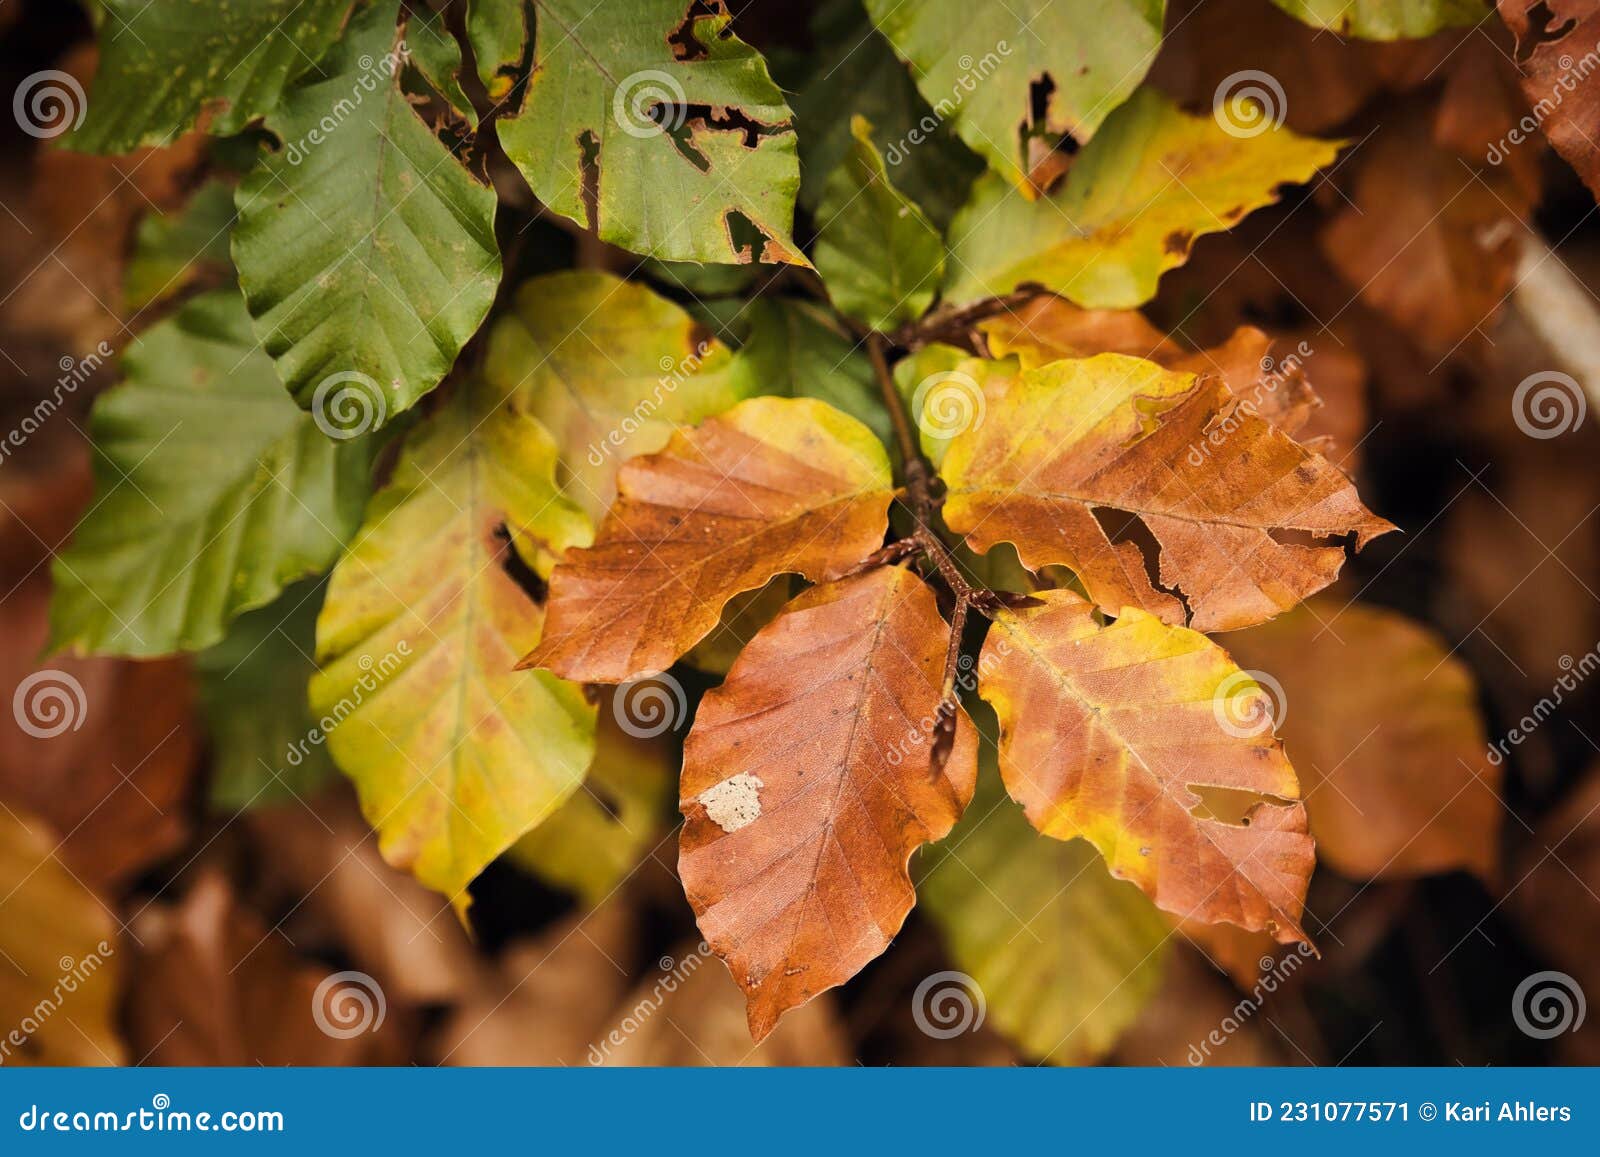 greem. yellow and brown leaves on a branch